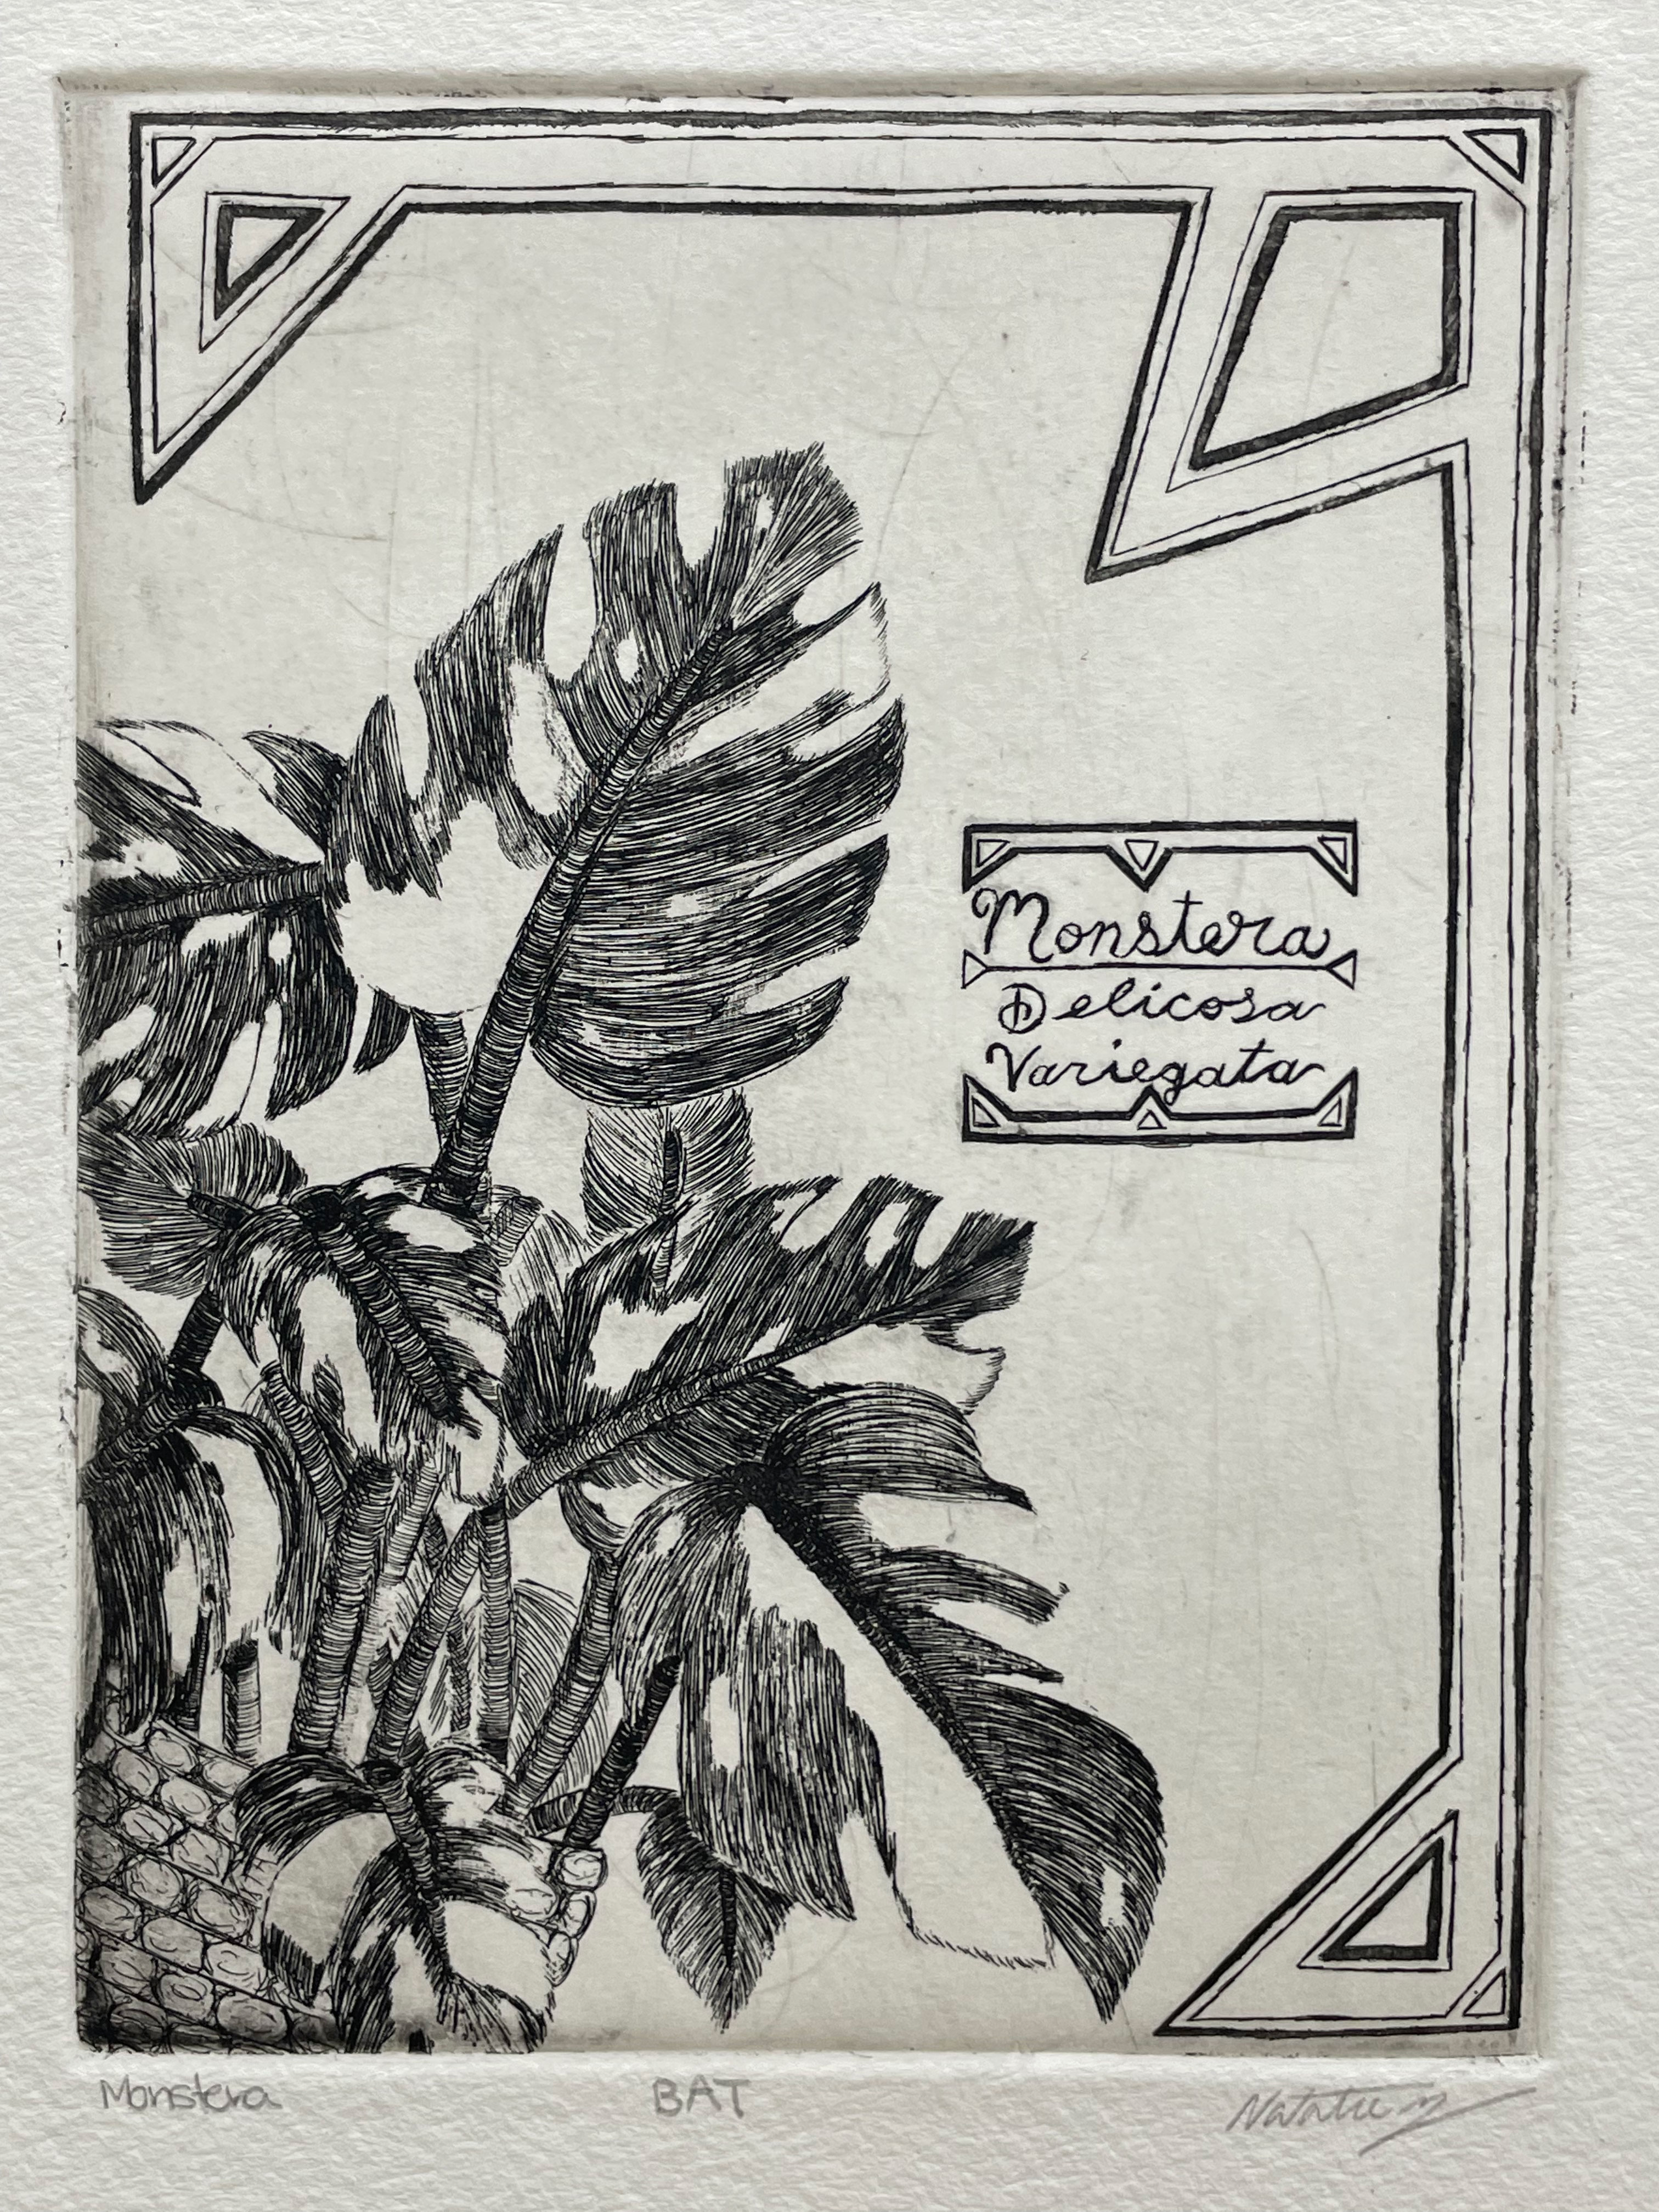 A black and white printed image composed of a plant in the bottom left hand corner with the words "Monstera Deliciosa Variegata" written on the right side. 